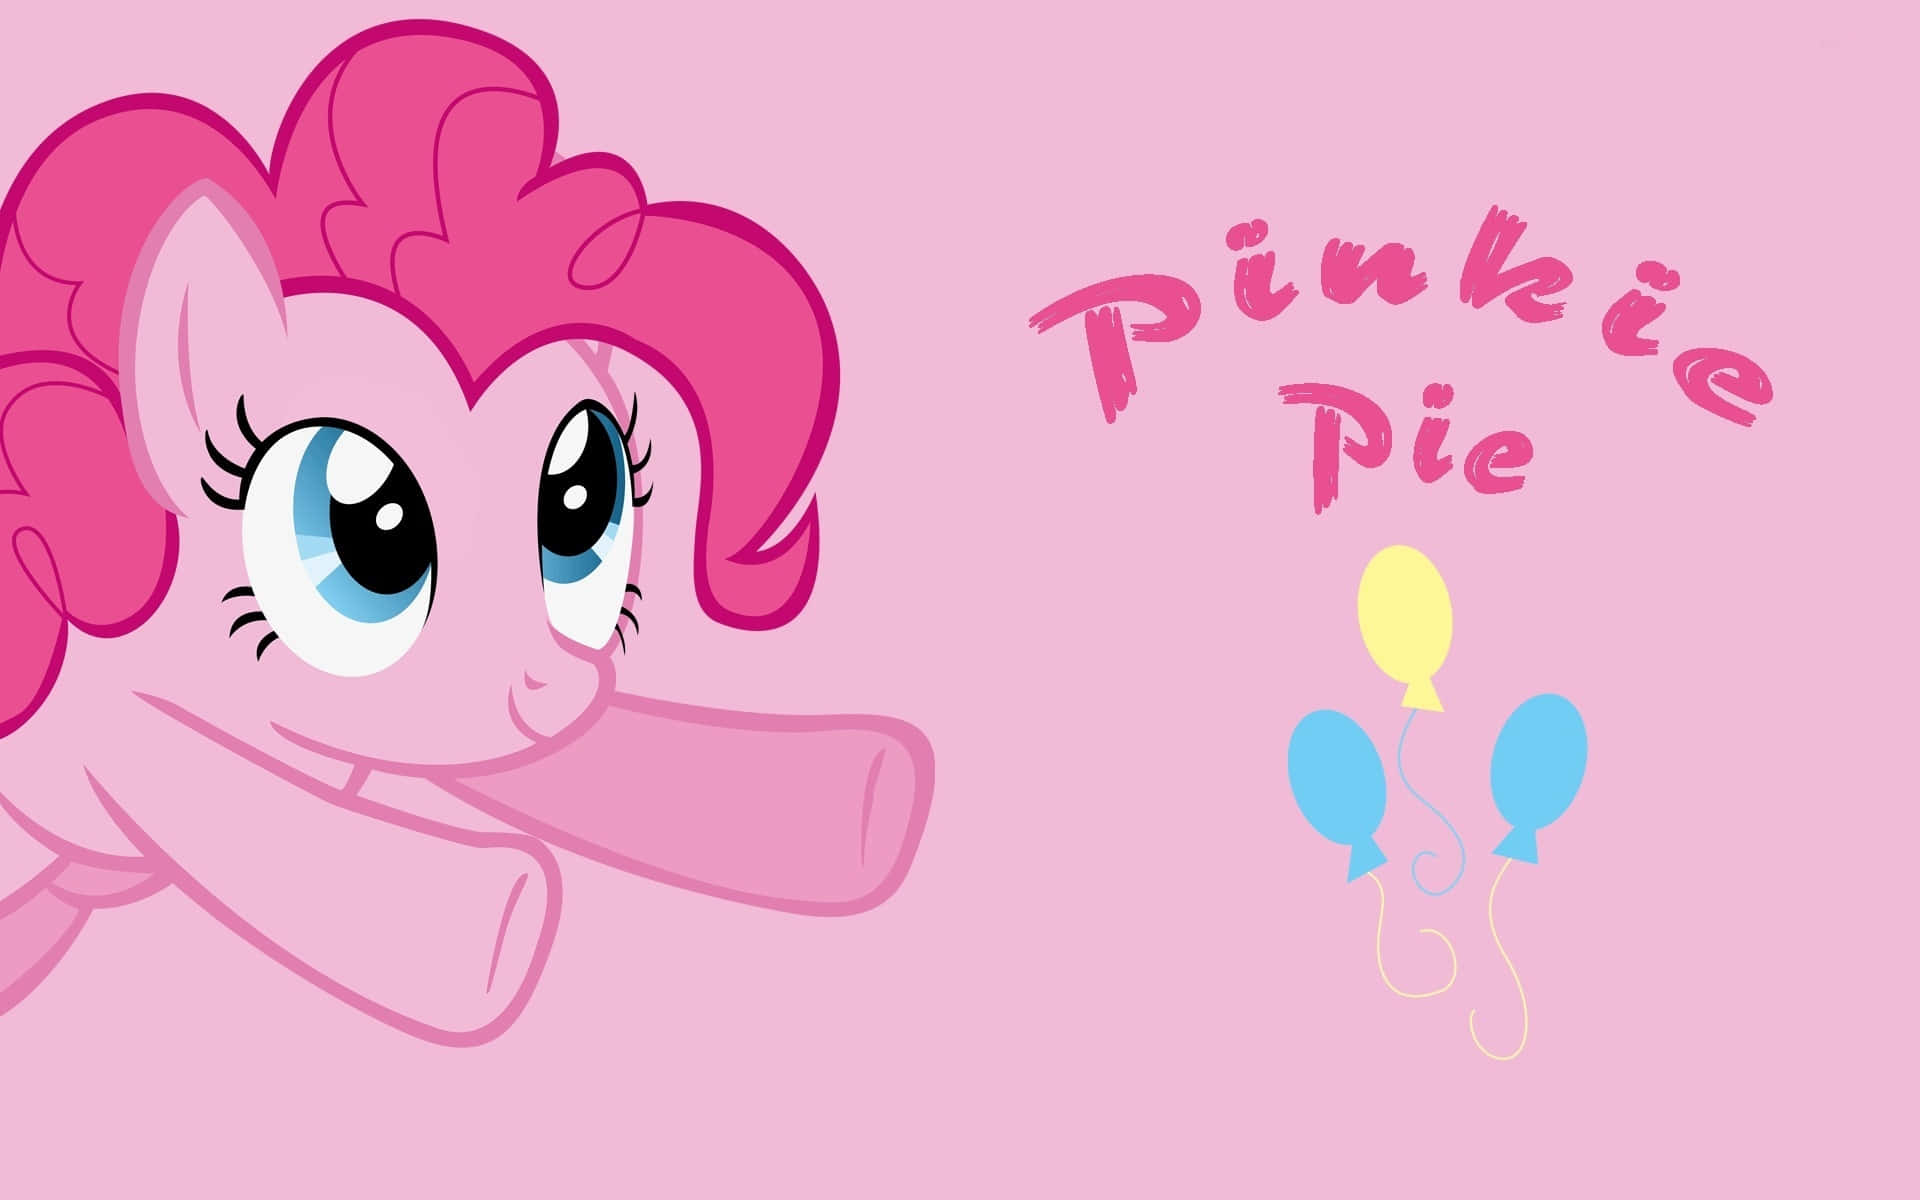 Pinkie Pie bouncing on a cloud